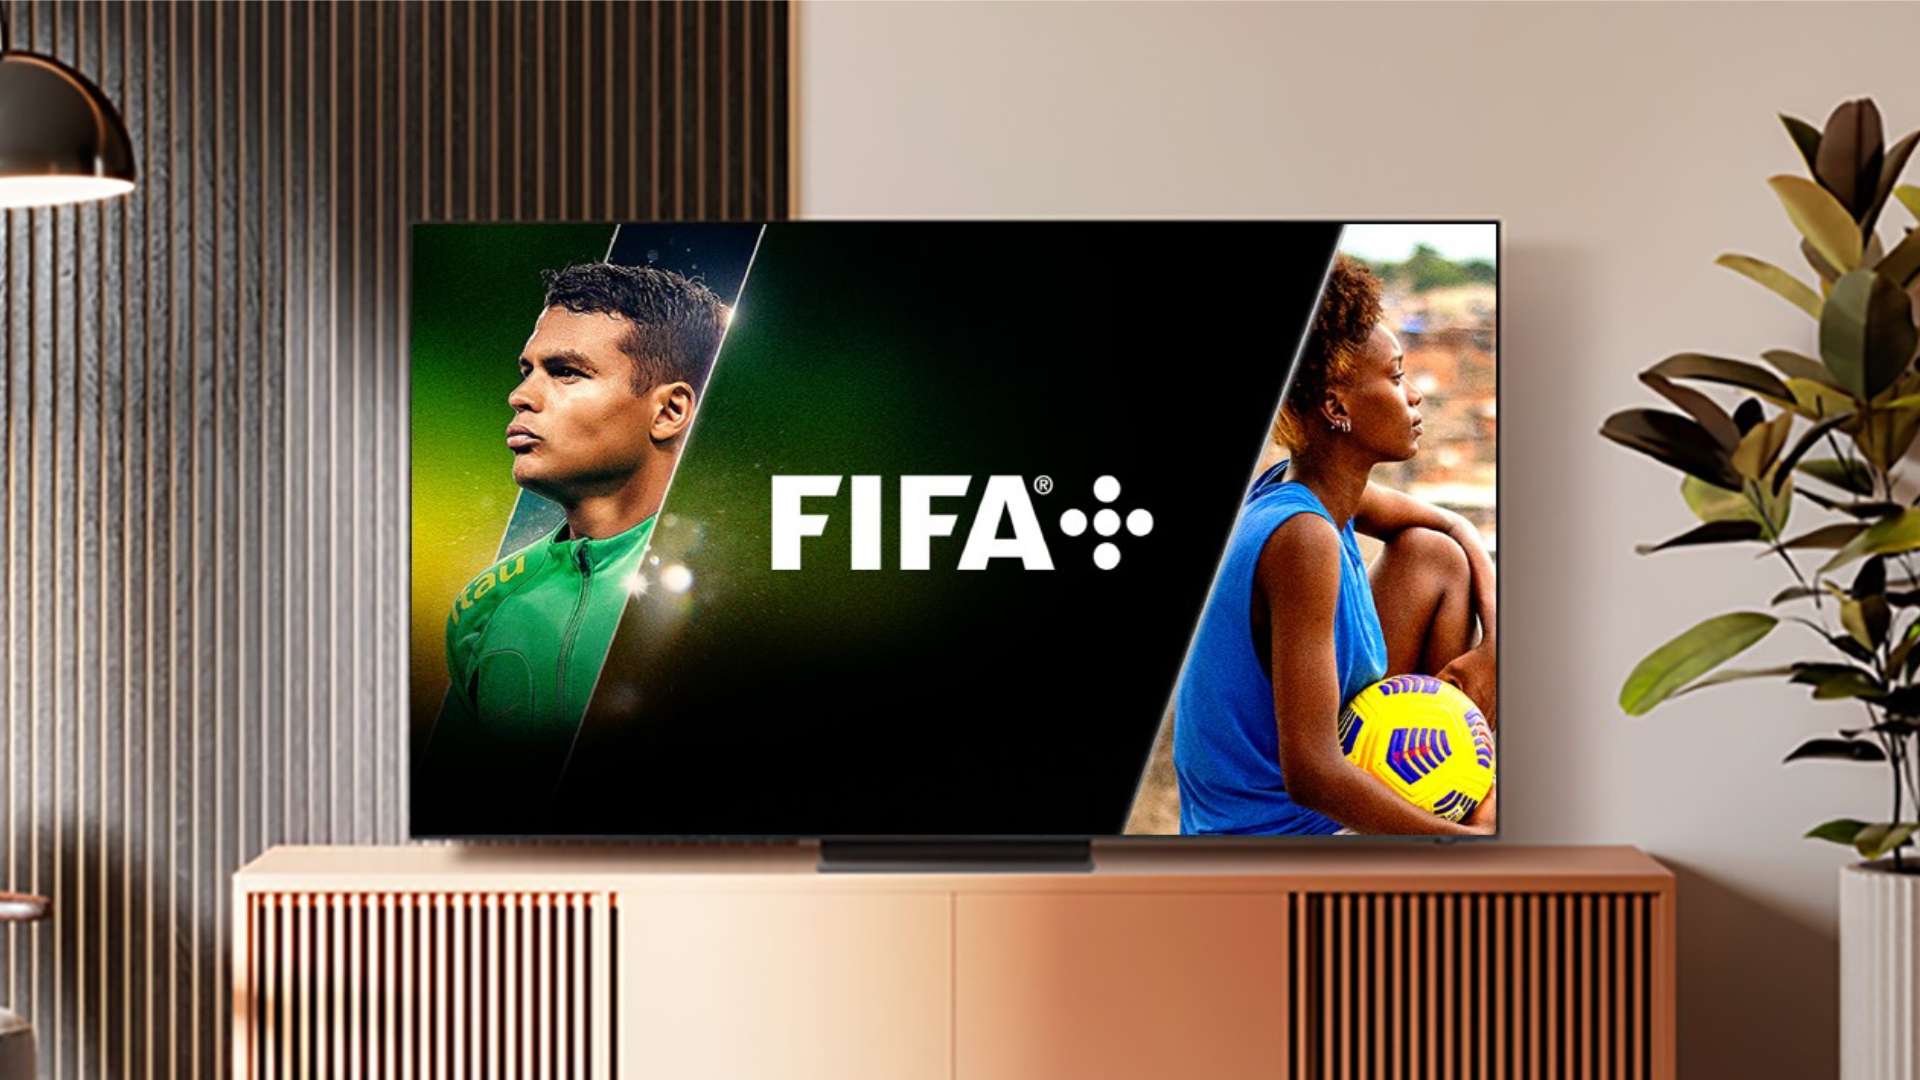 FIFA World Cup on X: Follow the game LIVE and FREE on FIFA+